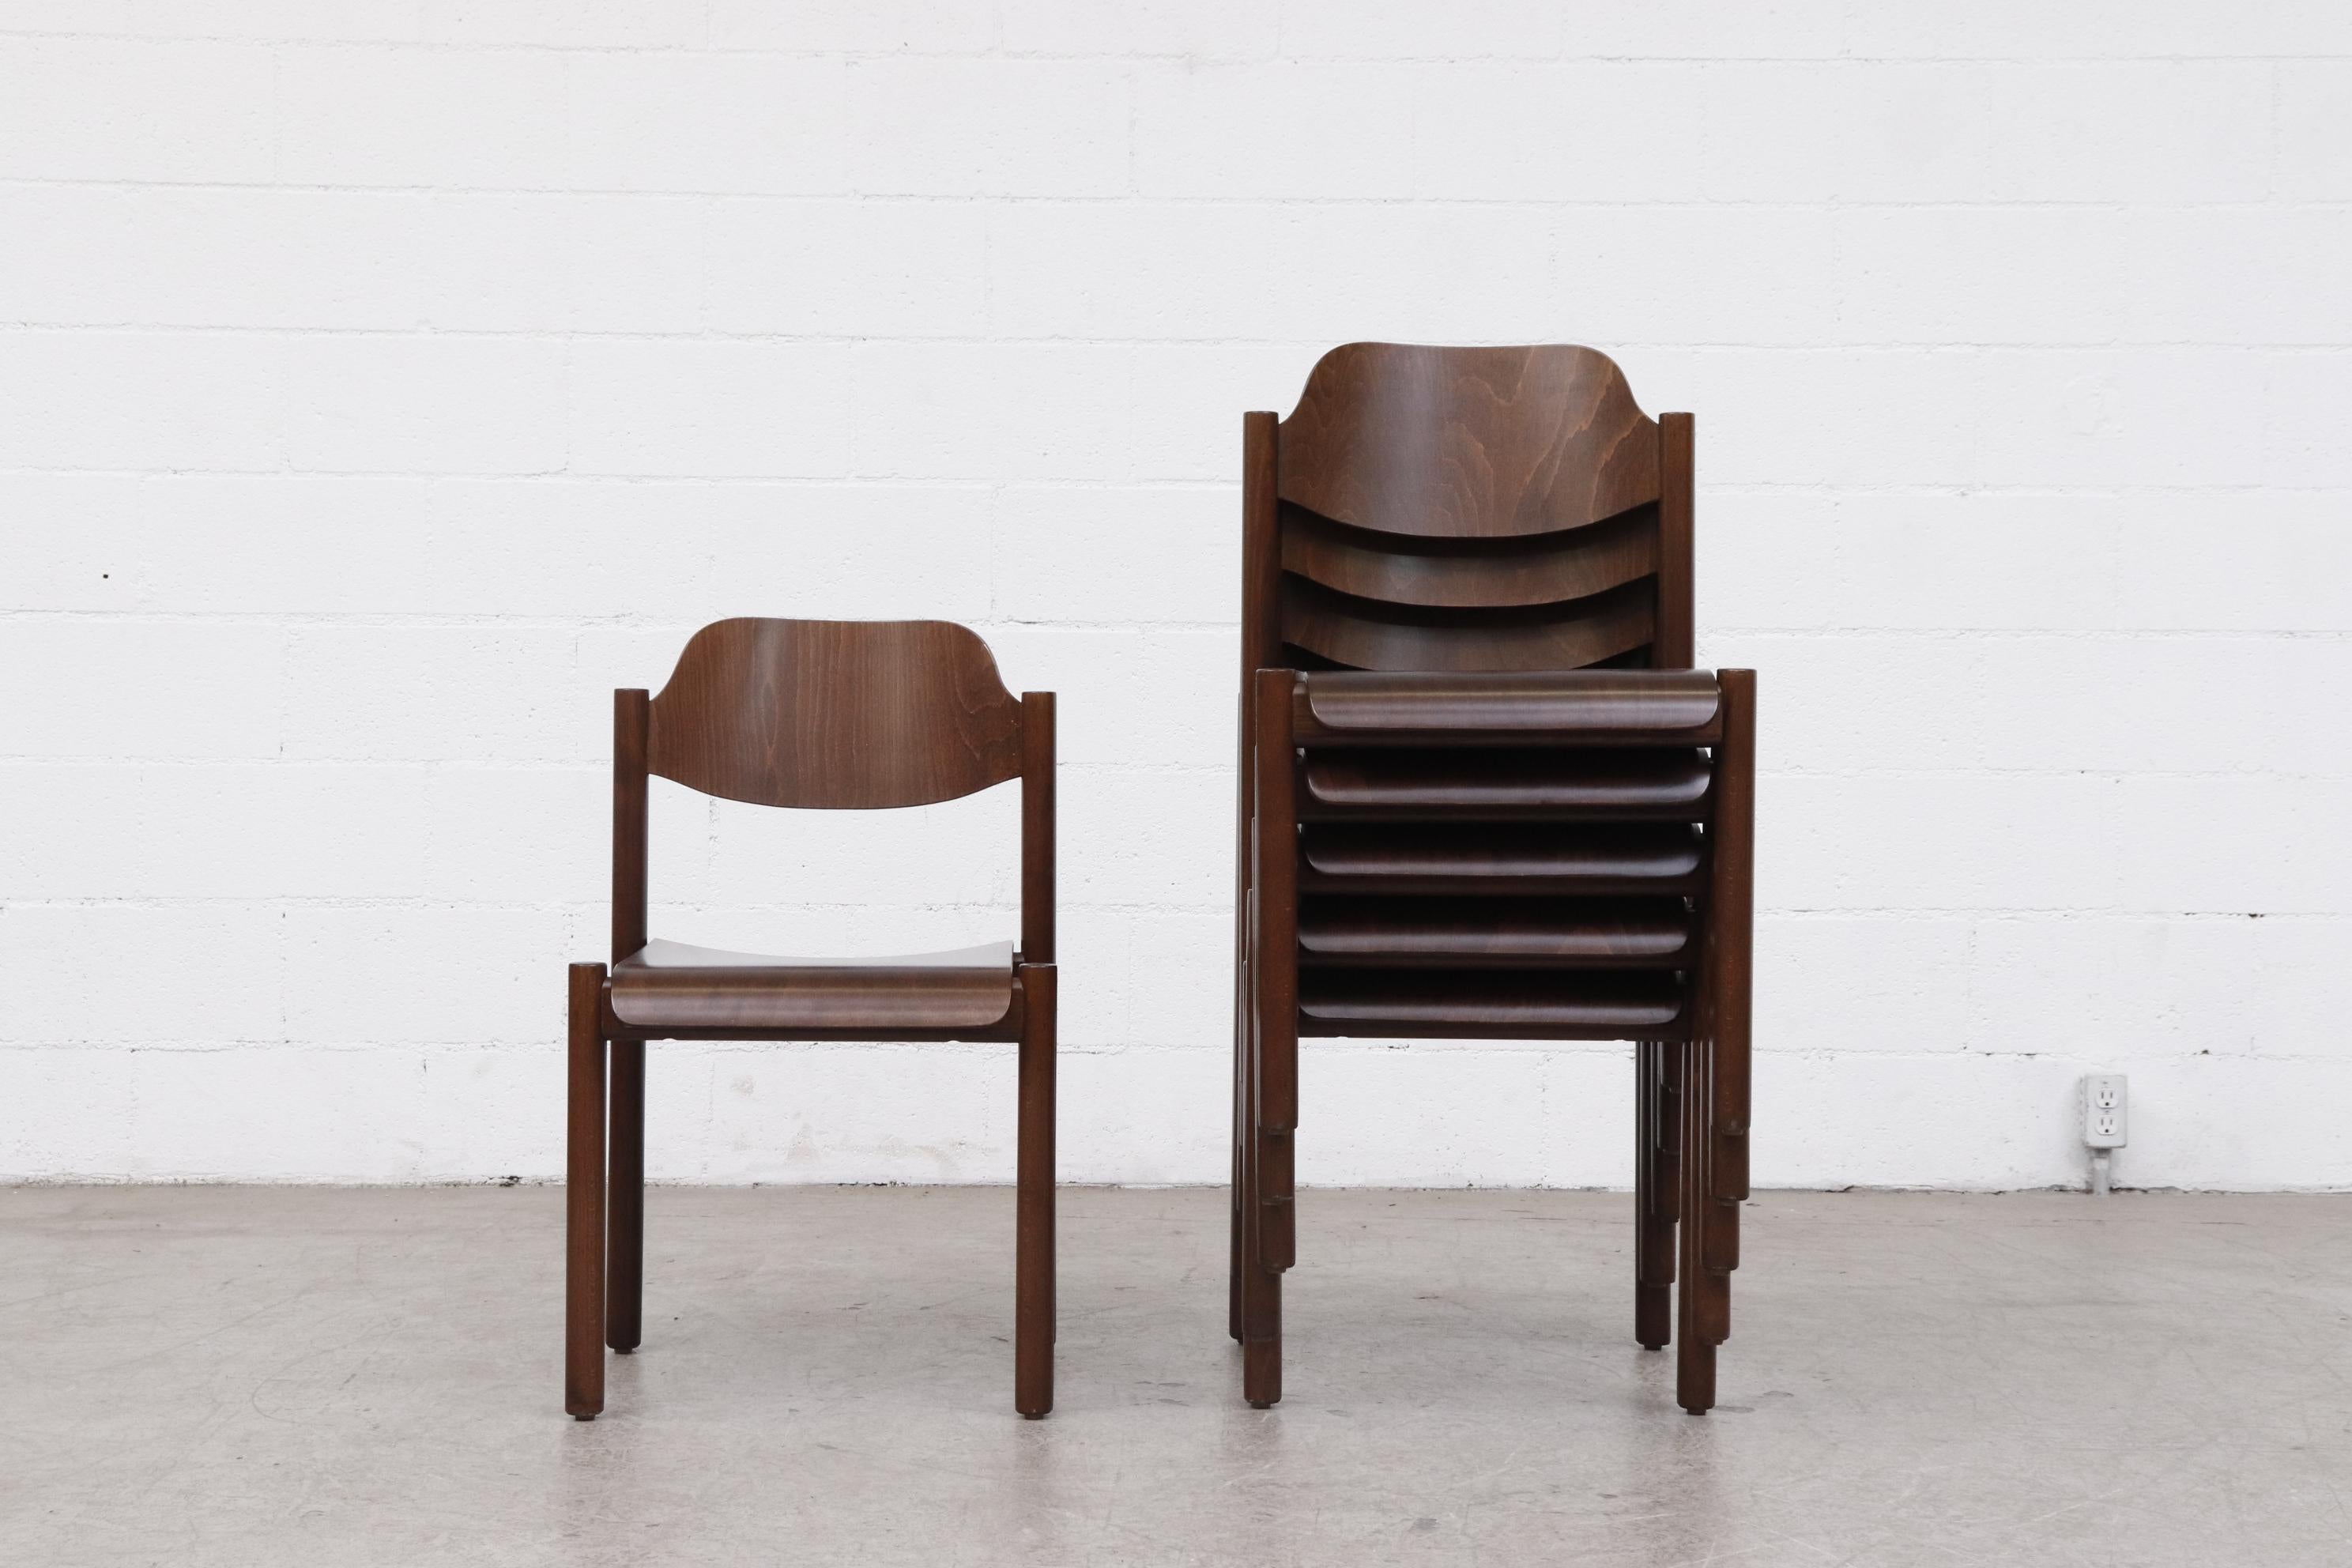 Dark Walnut Toned Stacking Wood Chairs. Formed Plywood Seats and Backs with Round Legs   Inset Seats for Convenient Stacking. In Original Condition with Visible Patina and Wear Consistent with their Age and Use. Priced Individually.
Lead time from